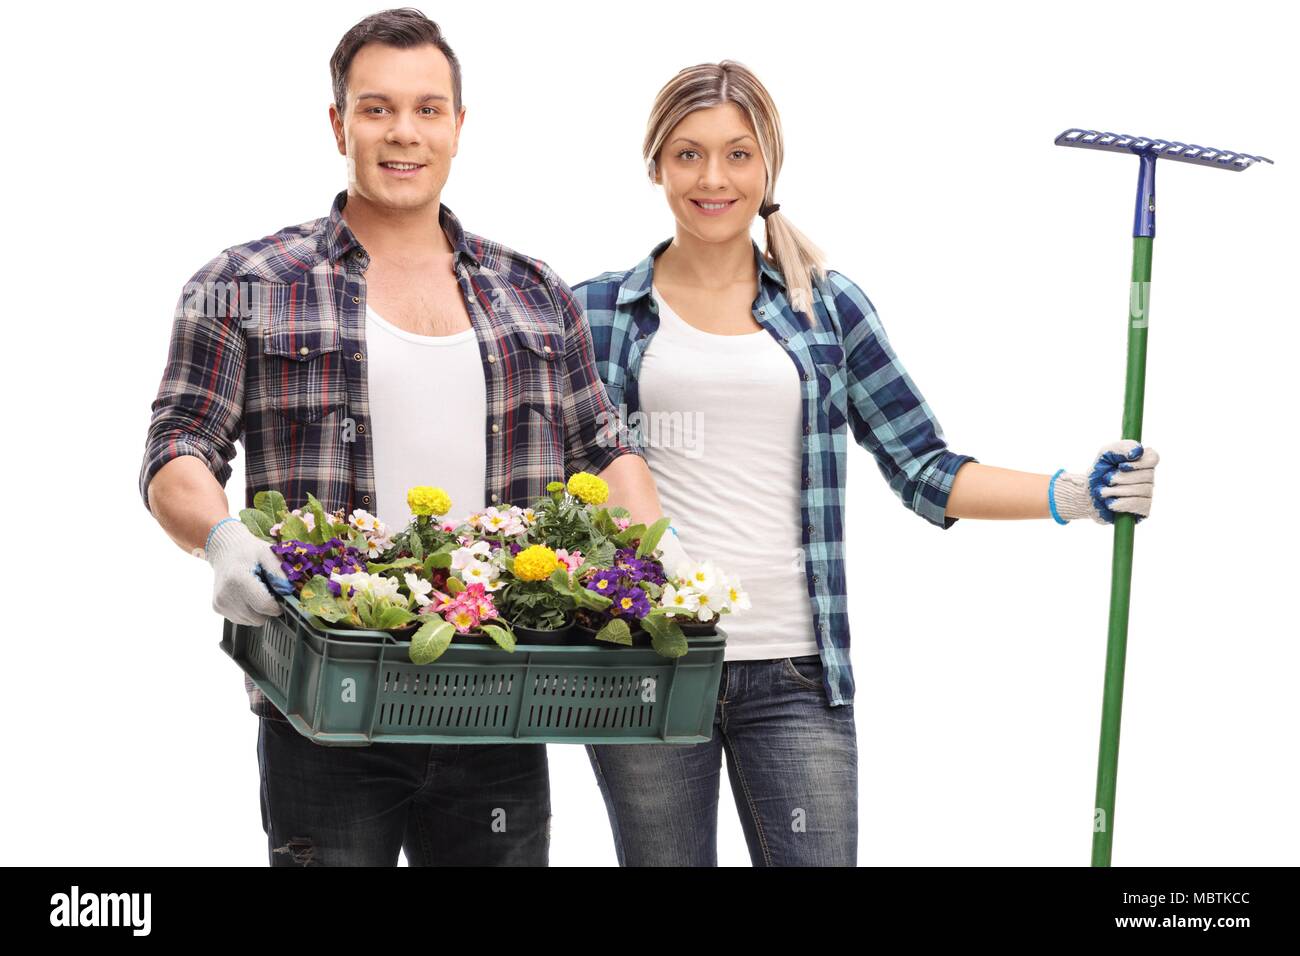 Male gardener with a rack of flowers and a female gardener with a rake isolated on white background Stock Photo